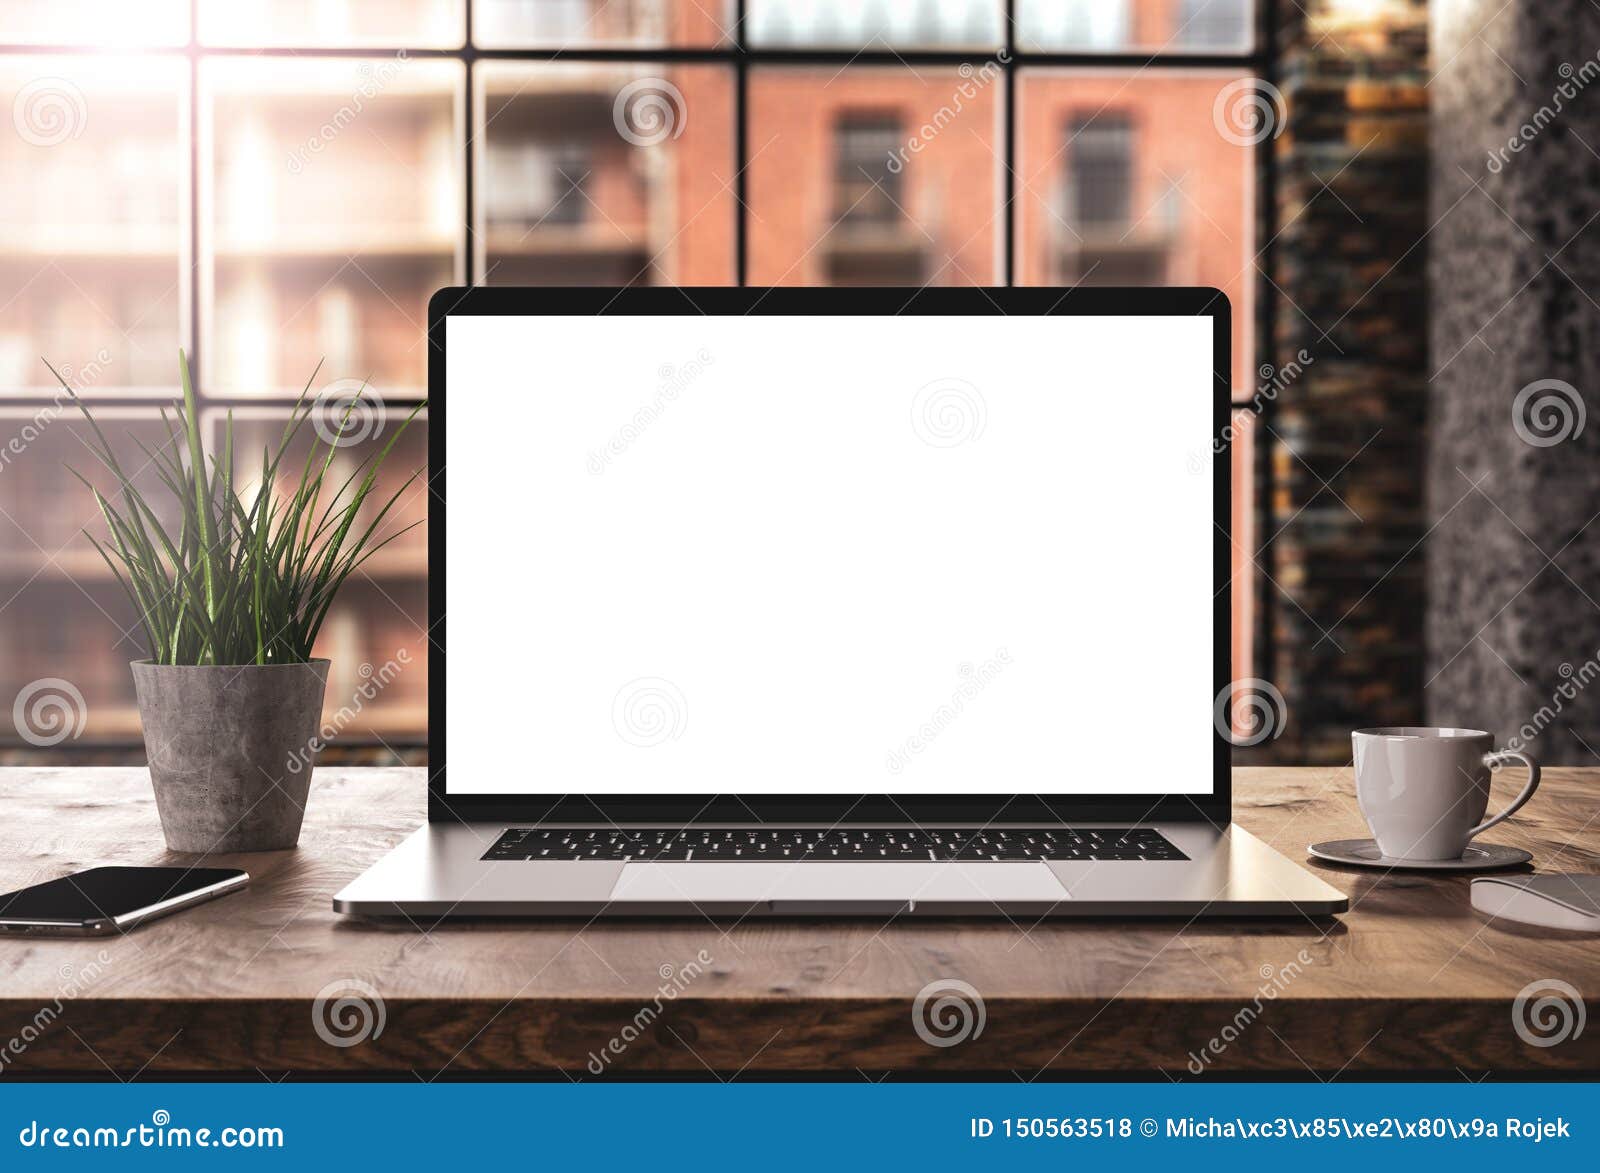 laptop with blank screen mockup template on table in industrial old factory loft interior